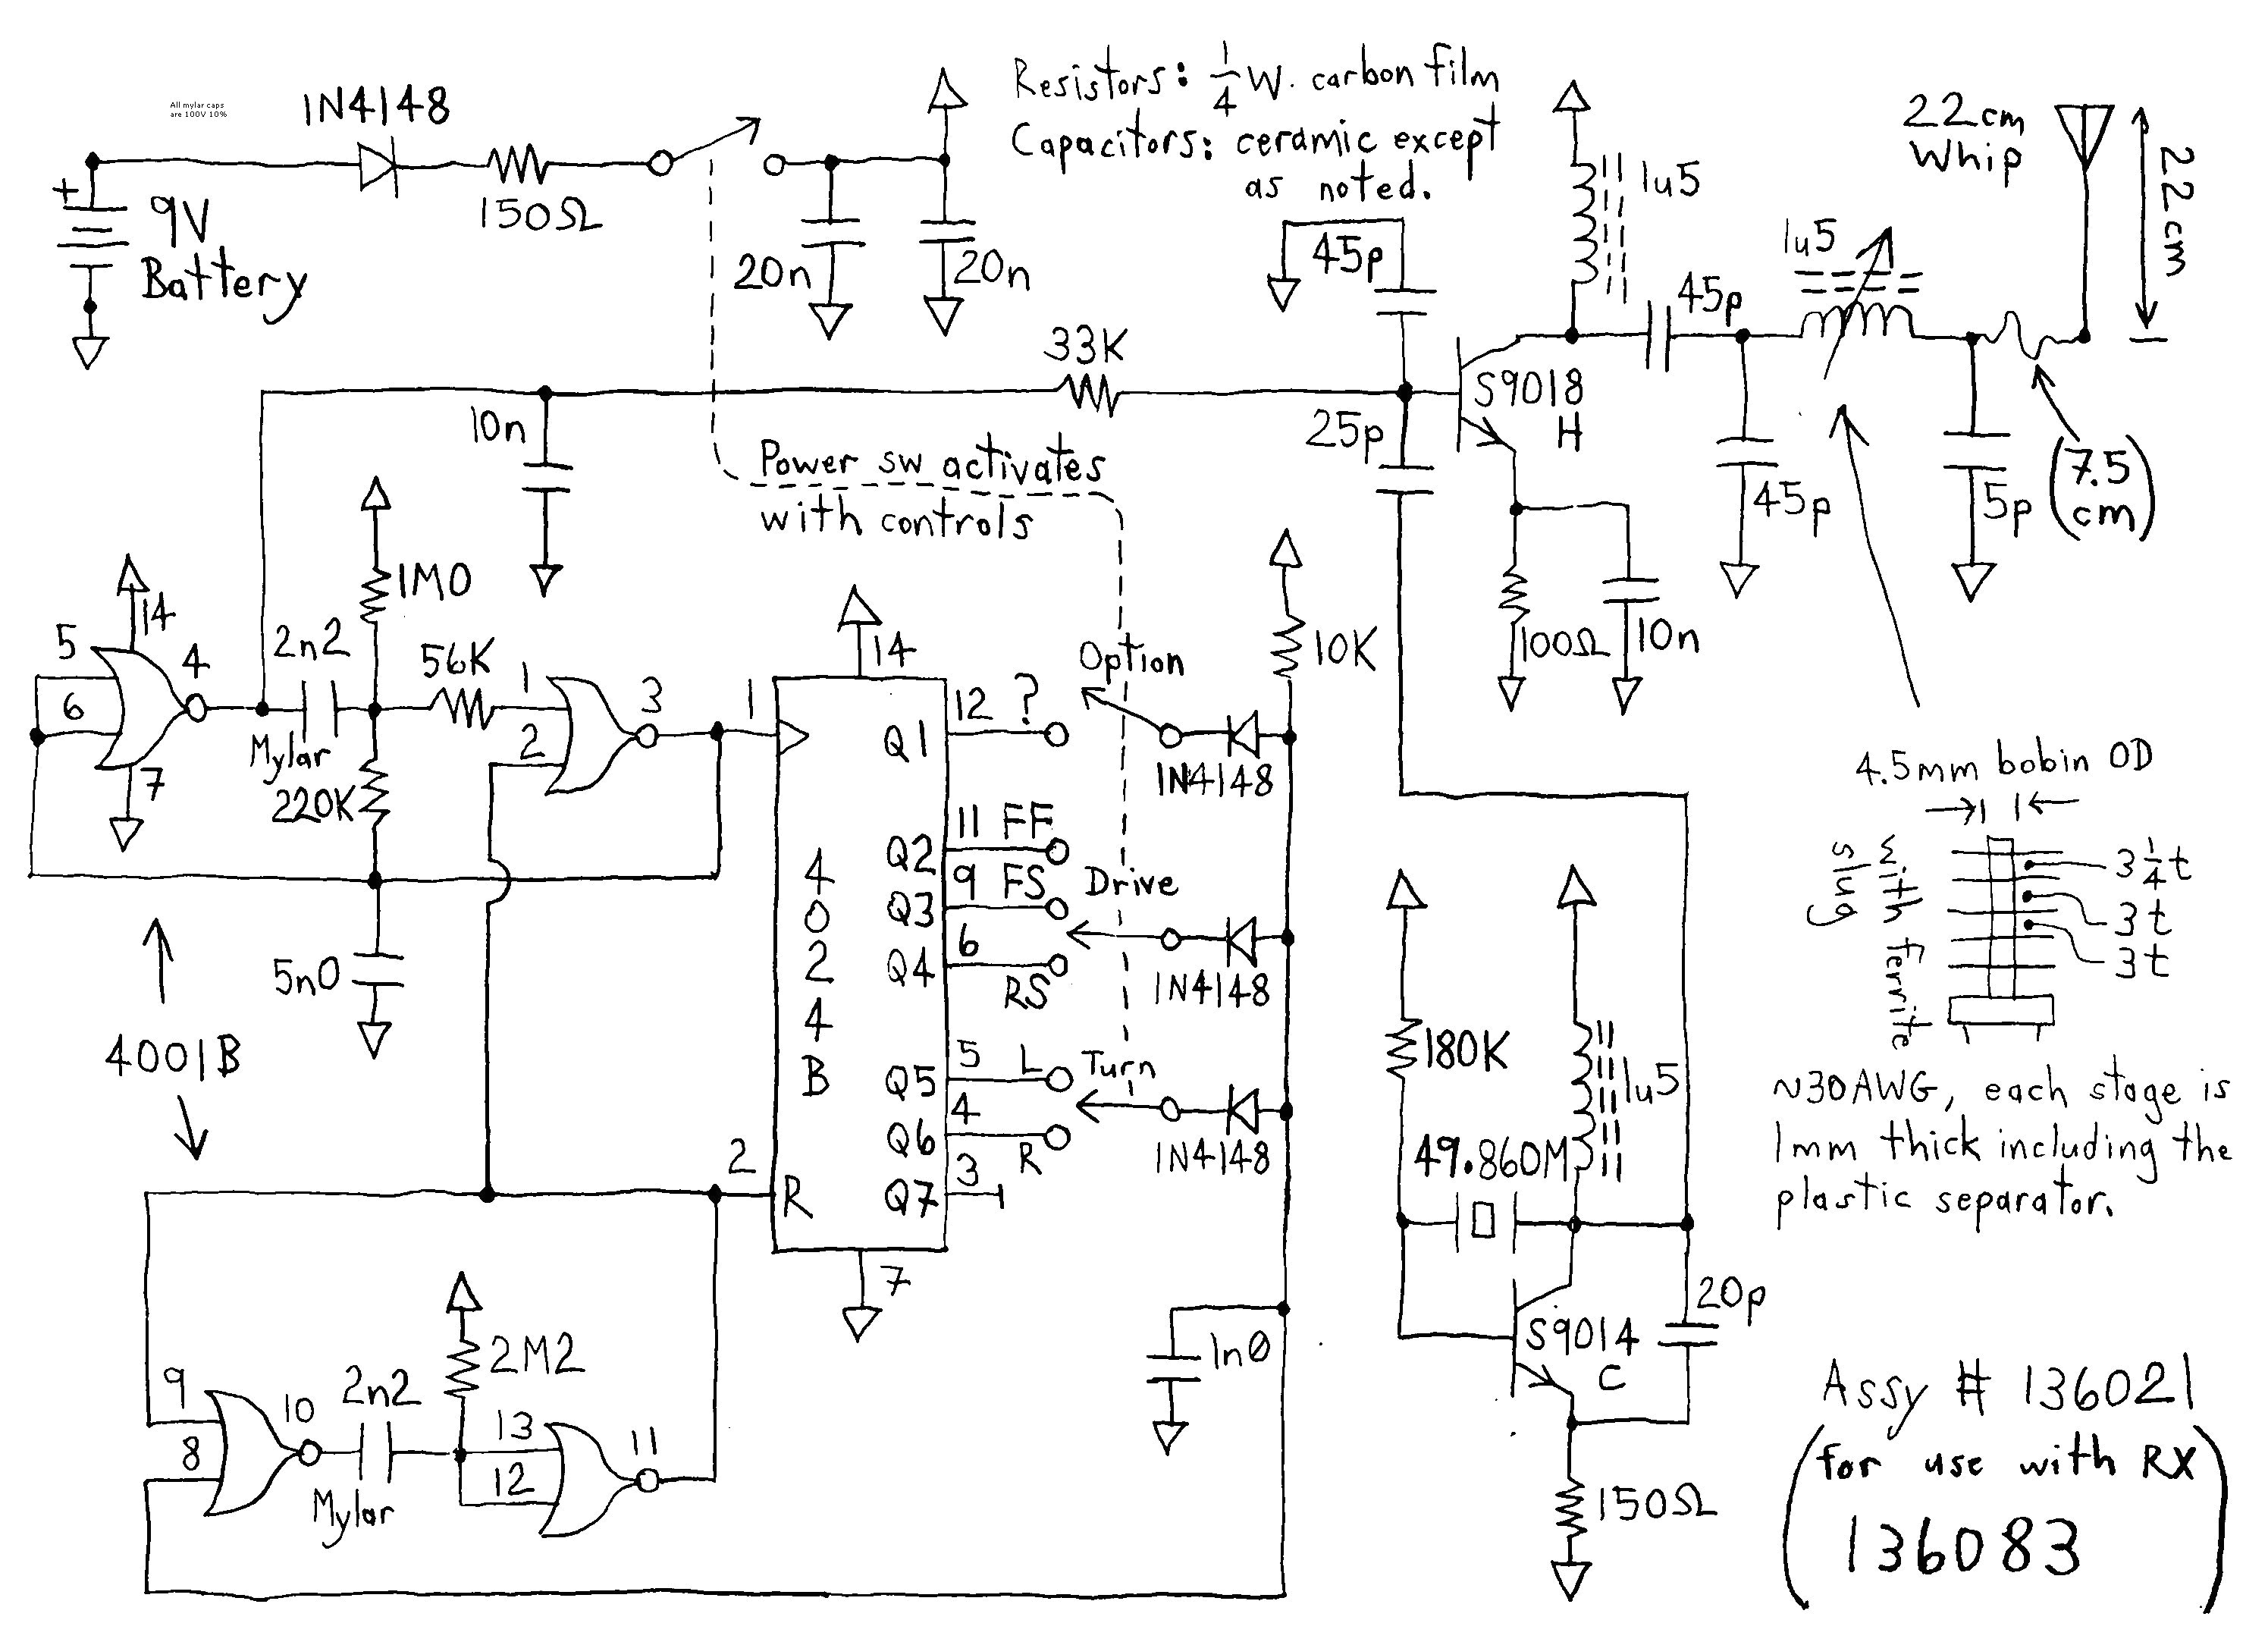 4 channel amp wiring diagram inspirational how to wire a 5 channel amp diagram pickenscountymedicalcenter pictures of 4 channel amp wiring diagram jpg